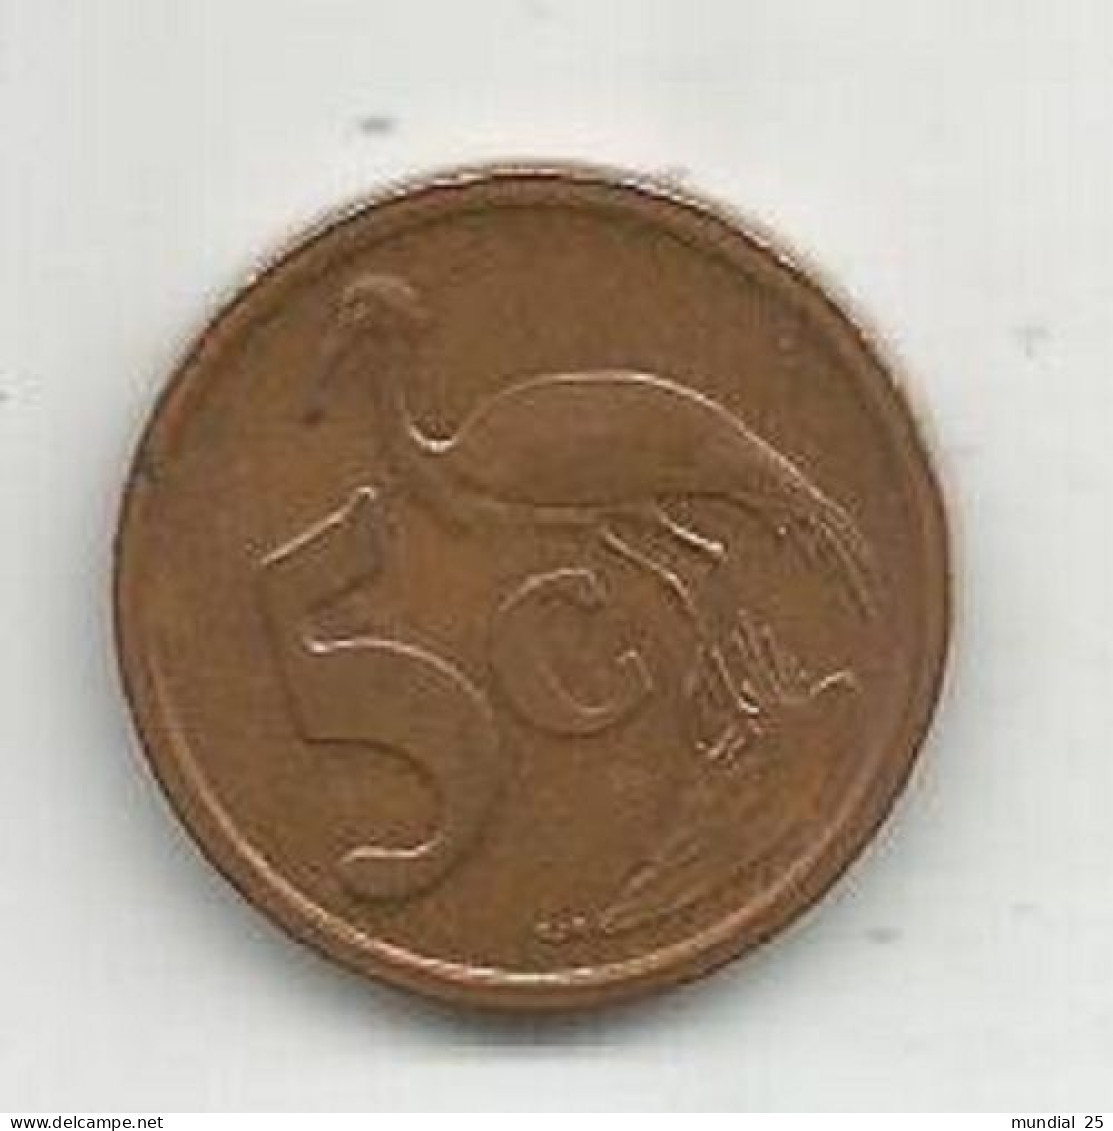 SOUTH AFRICA 5 CENTS 2004 - South Africa